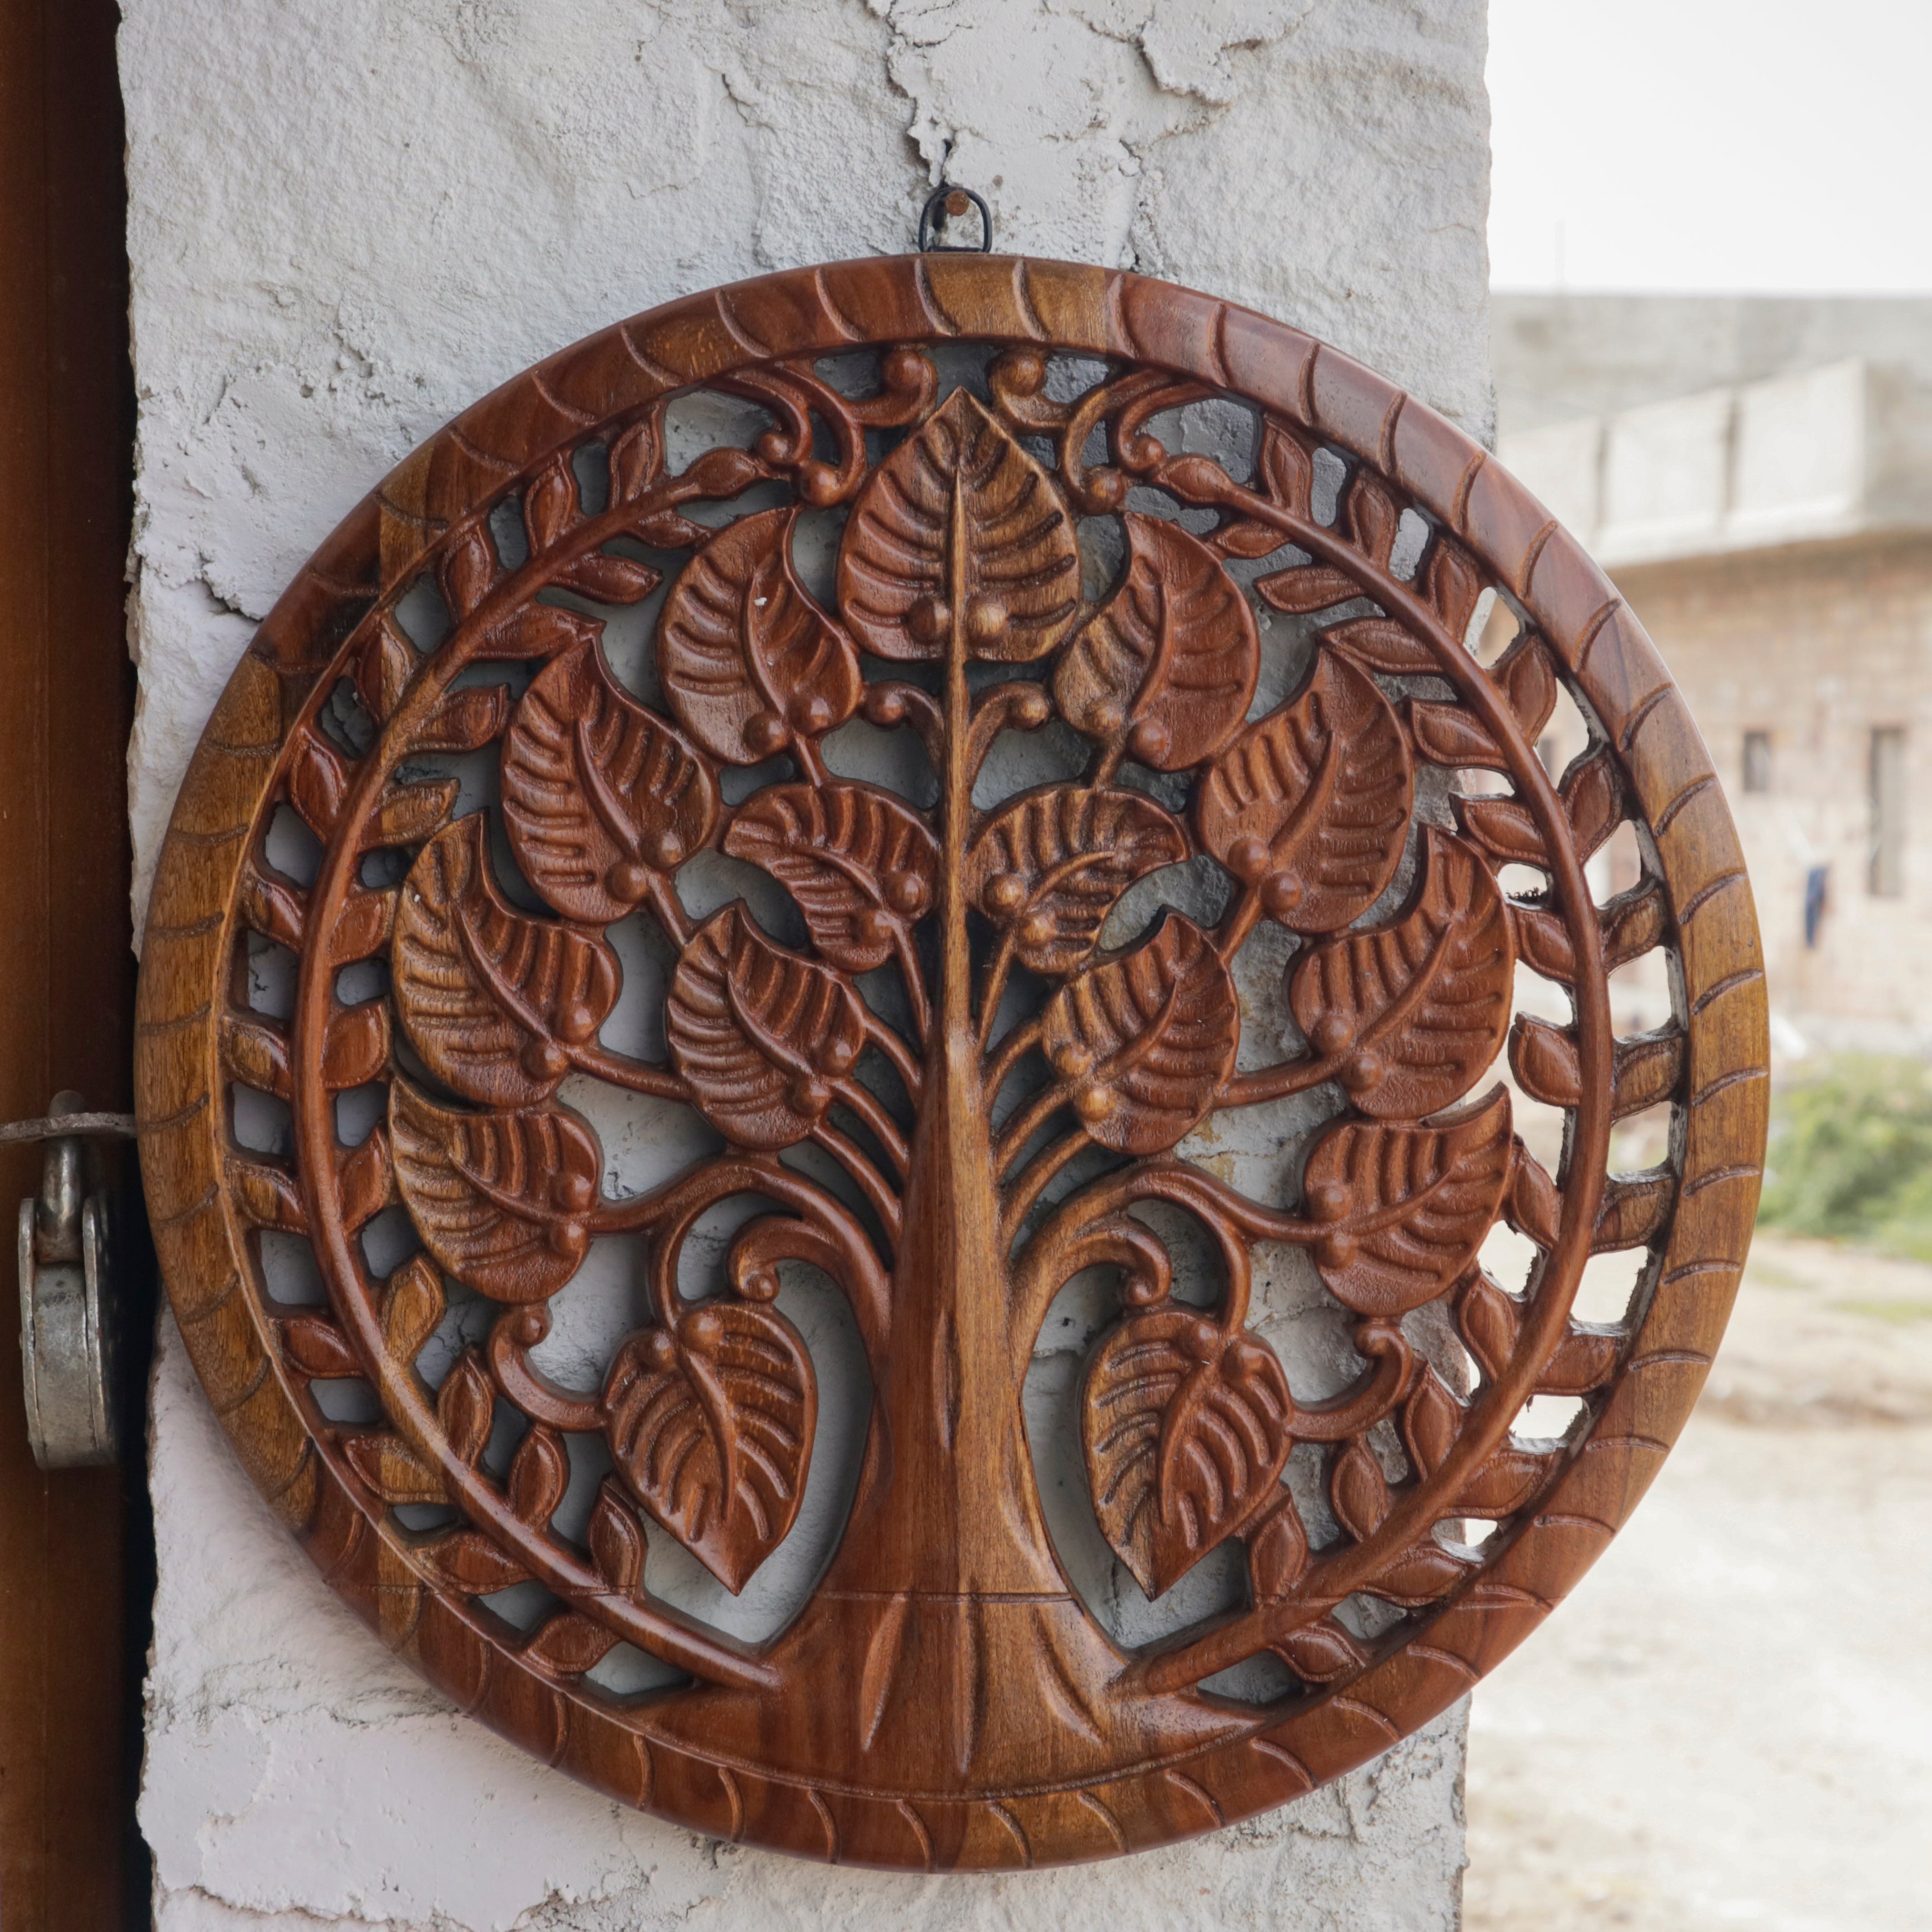 Solid Wooden Hand Crafted Wall Decor Panel And Tree Concept Design Wall Decor